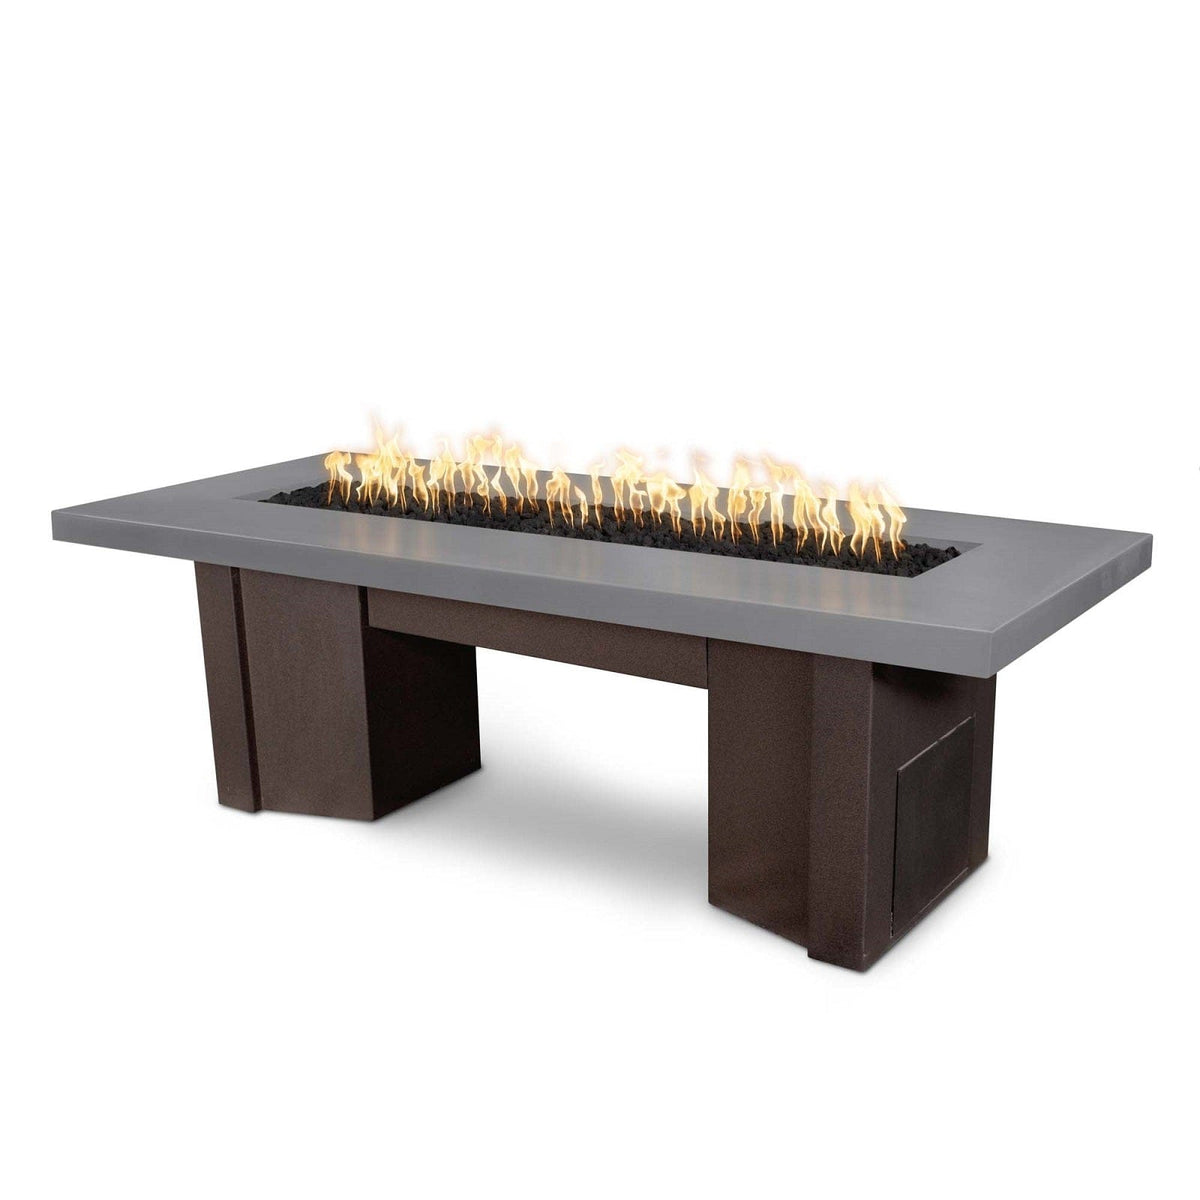 The Outdoor Plus Fire Features Natural Gray (-NGY) / Java Powder Coated Steel (-JAV) The Outdoor Plus 60&quot; Alameda Fire Table Smooth Concrete in Liquid Propane - Match Lit with Flame Sense System / OPT-ALMGFRC60FSML-LP